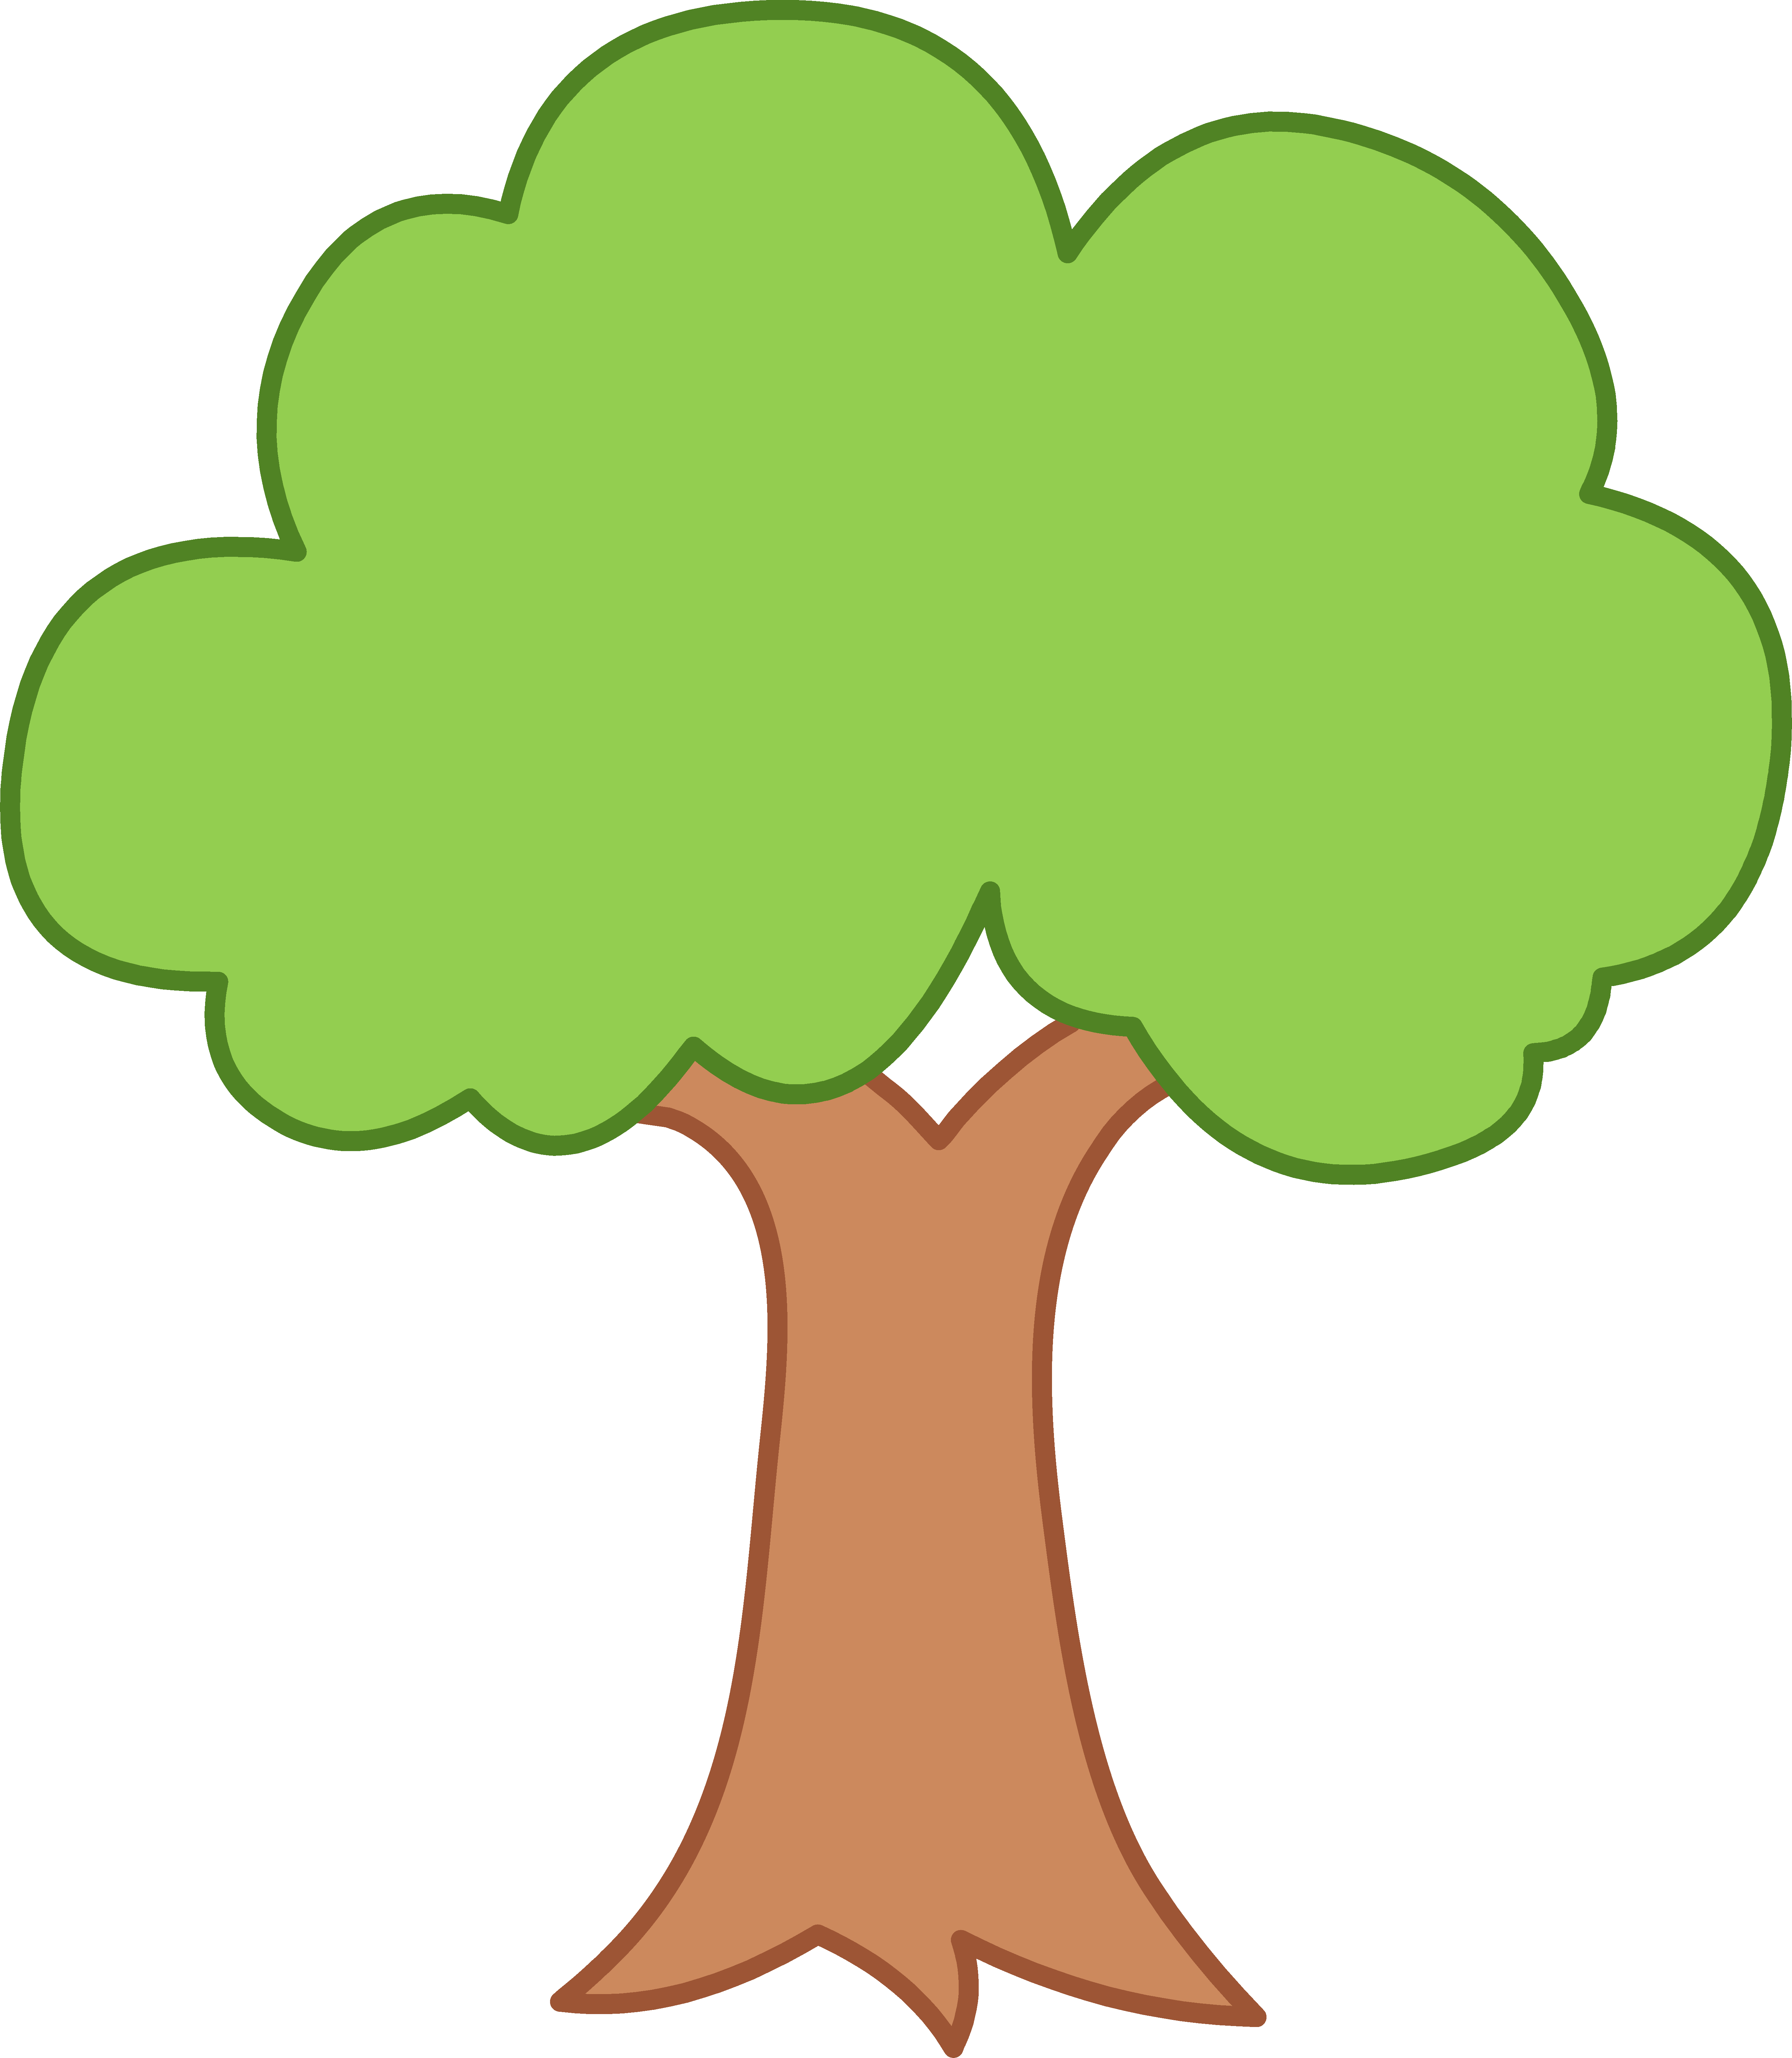 sketched tree vector clipart